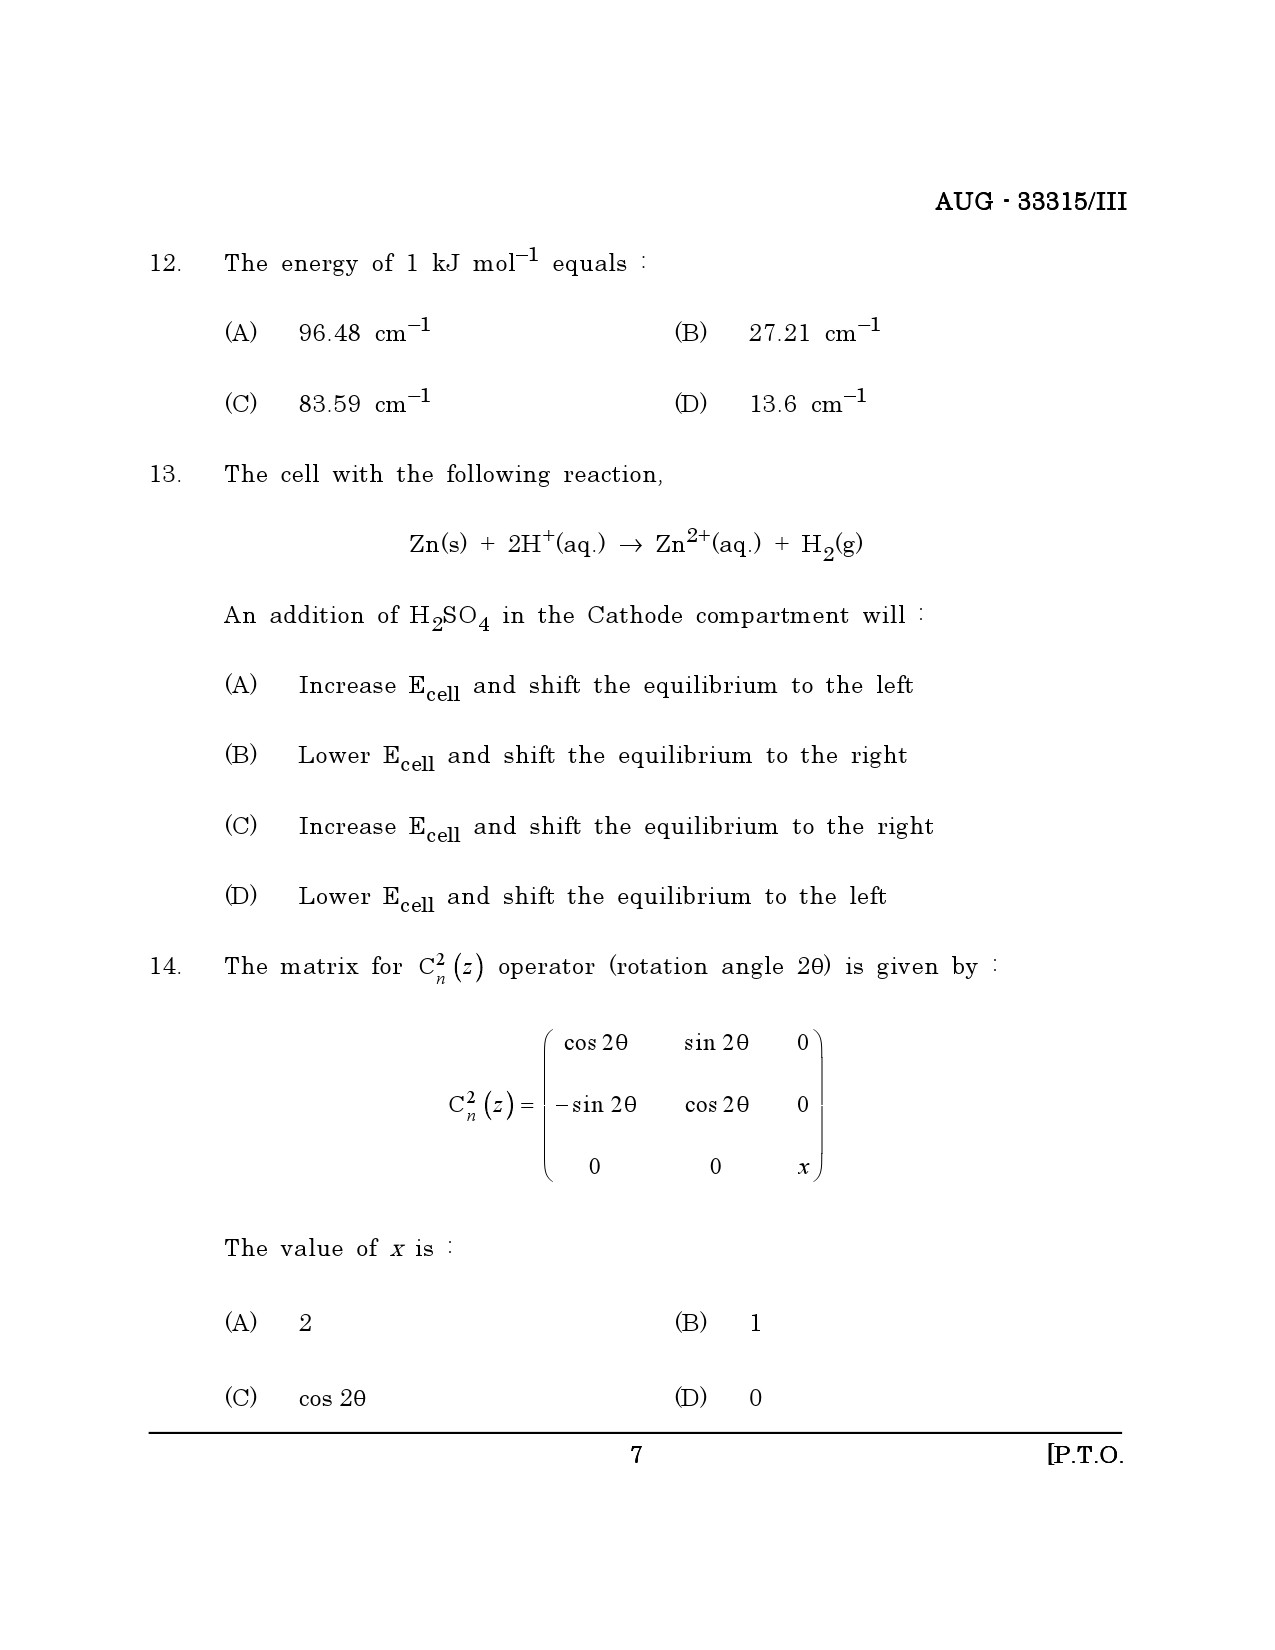 Maharashtra SET Chemical Sciences Question Paper III August 2015 6